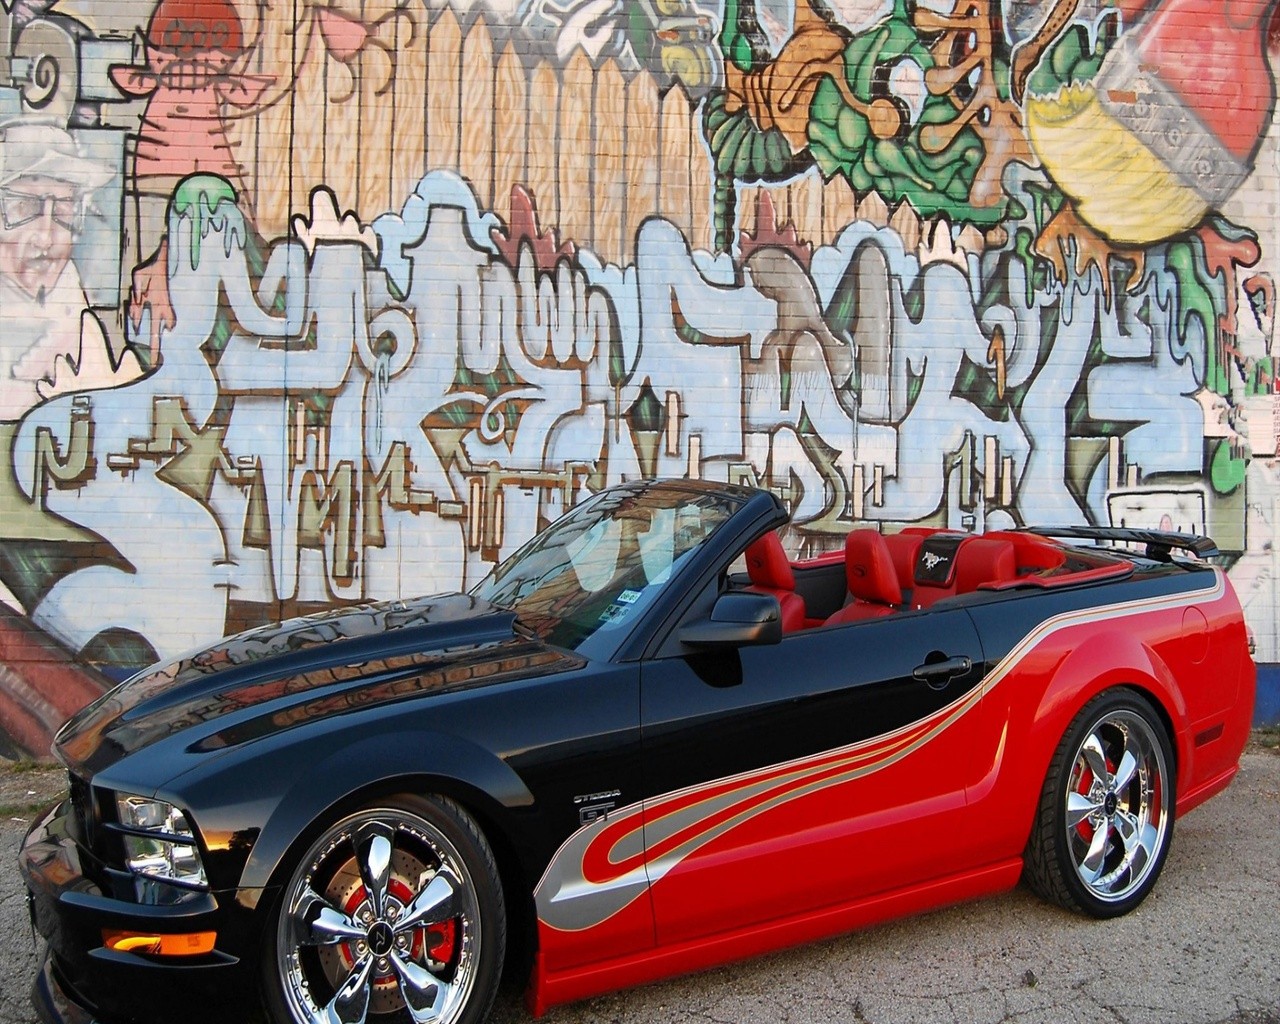 General 1280x1024 car graffiti vehicle Ford Ford Mustang convertible muscle cars American cars